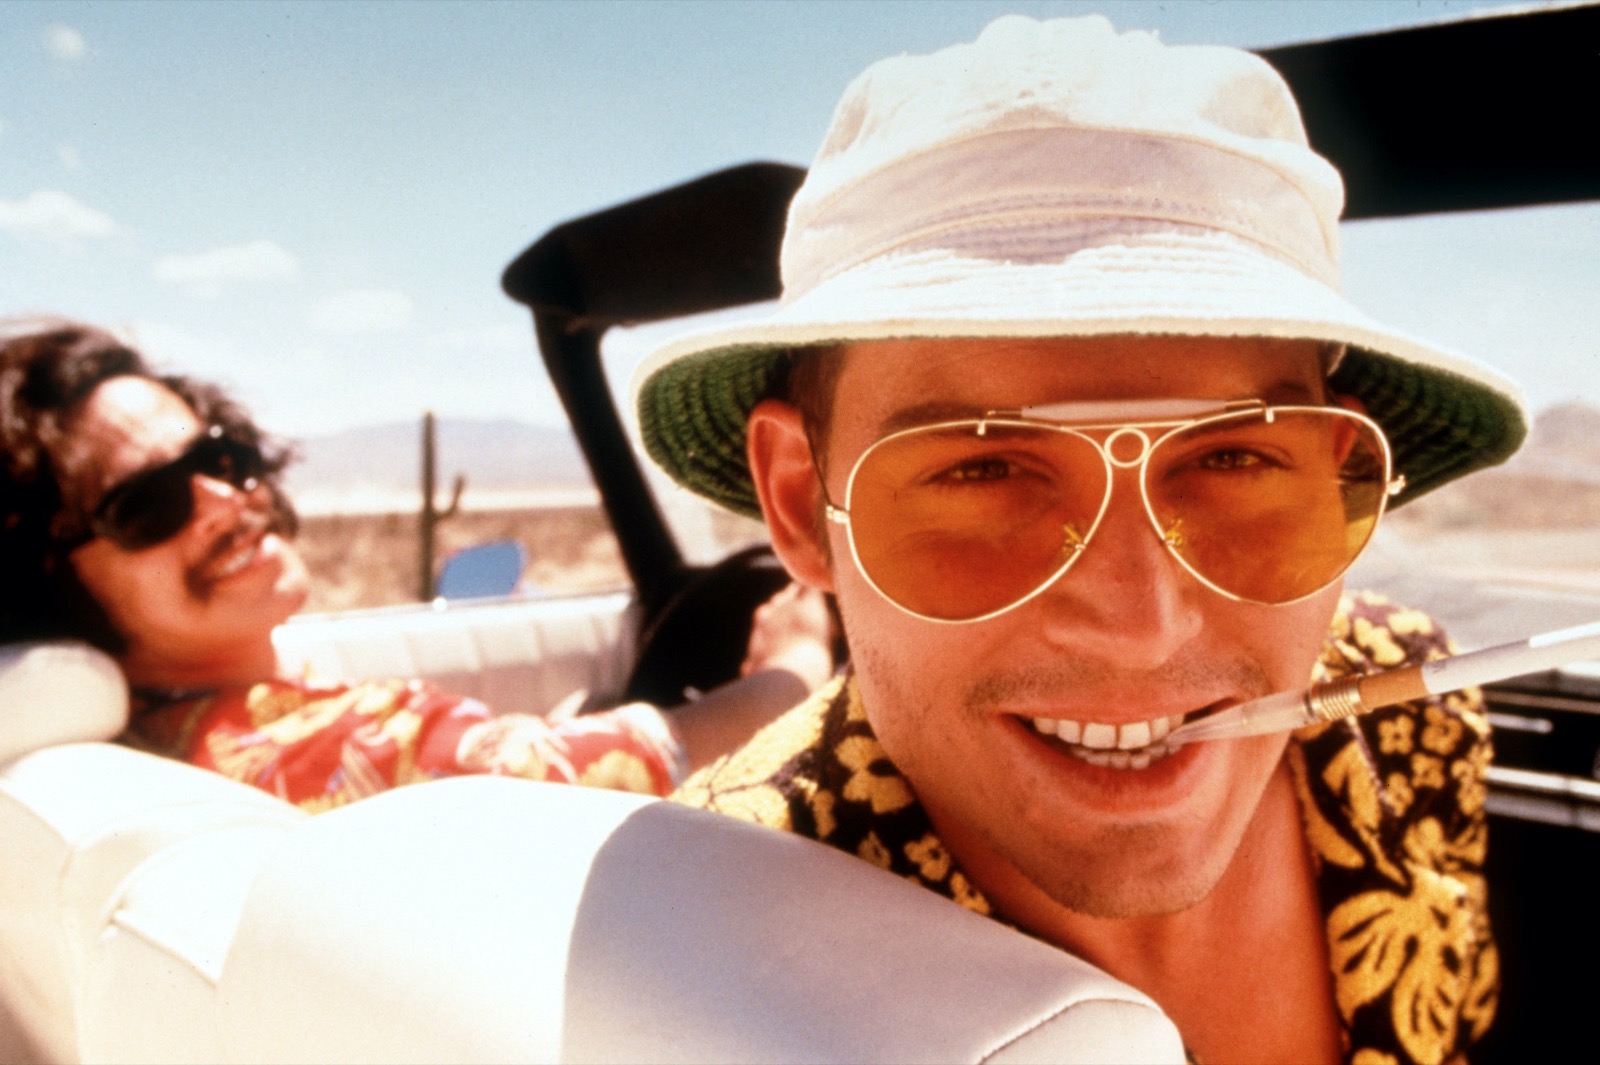 This May Be Shocking, But We Know Your Age Based on the Books You’ve Read Fear And Loathing In Las Vegas